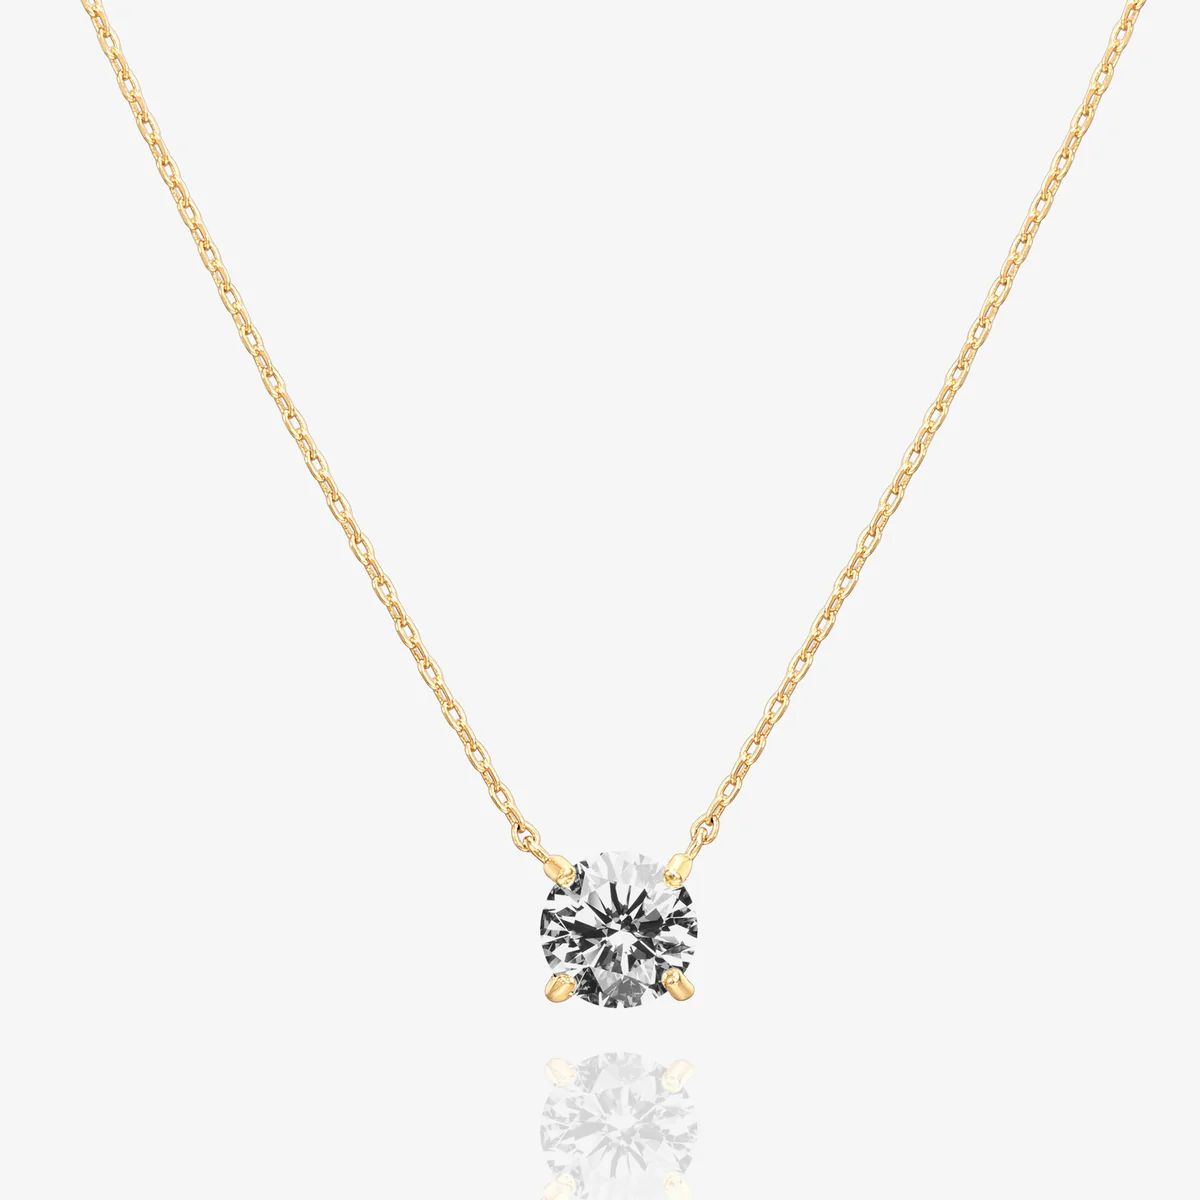 Shop 14K Gold Plated Solitaire Necklaces at PAVOI | Affordable Everyday Jewelry | PAVOI